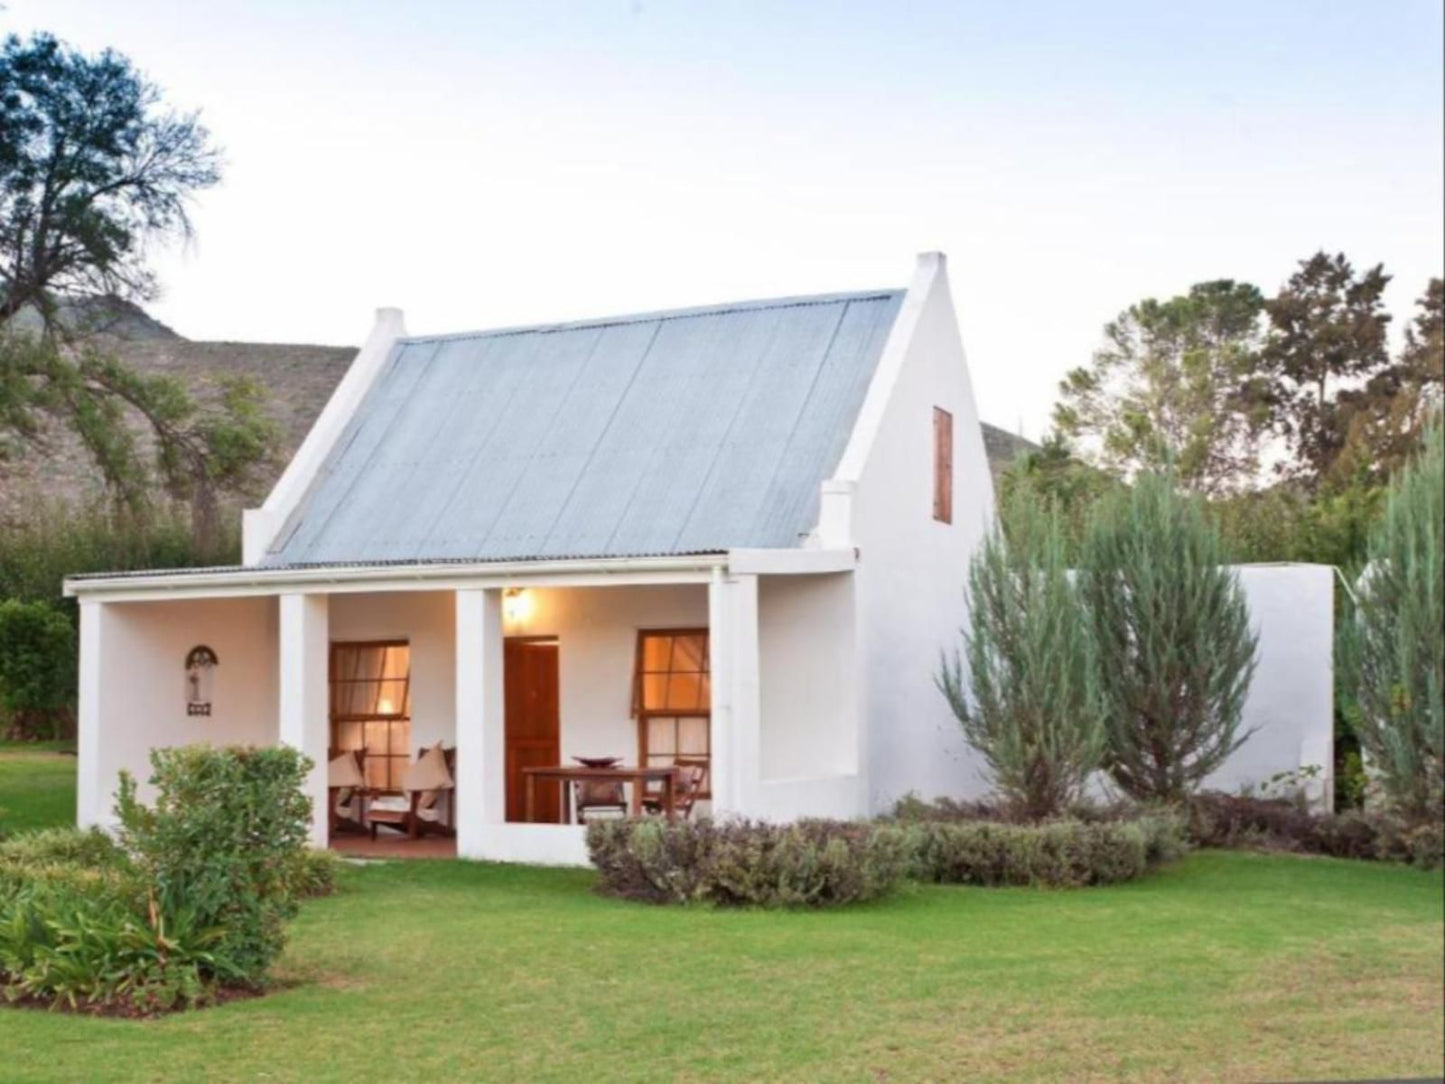 Oue Werf Country House Oudtshoorn Western Cape South Africa Building, Architecture, House